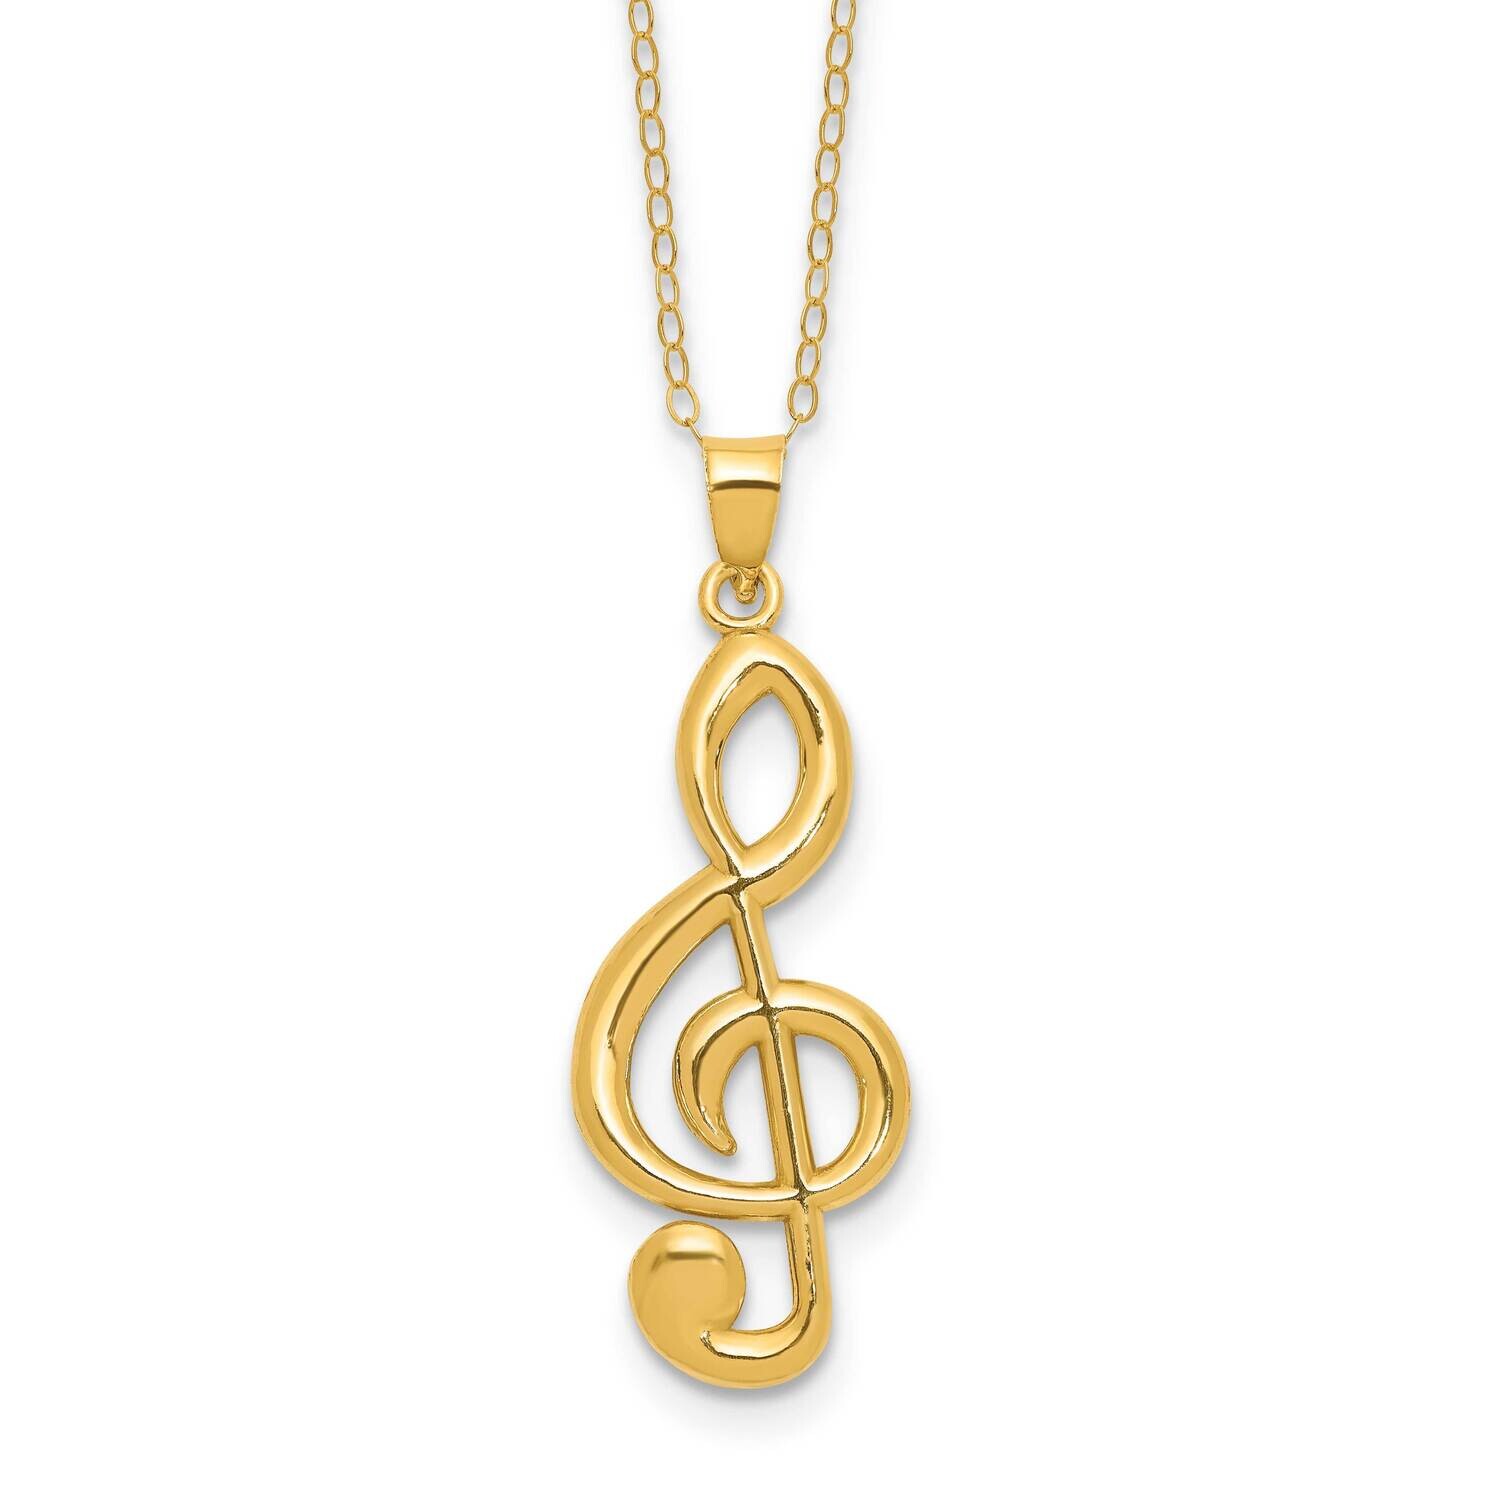 Gold-Tone 16 Inch 2 Inch Extender Treble Clef Necklace Sterling Silver QG6688GP-16